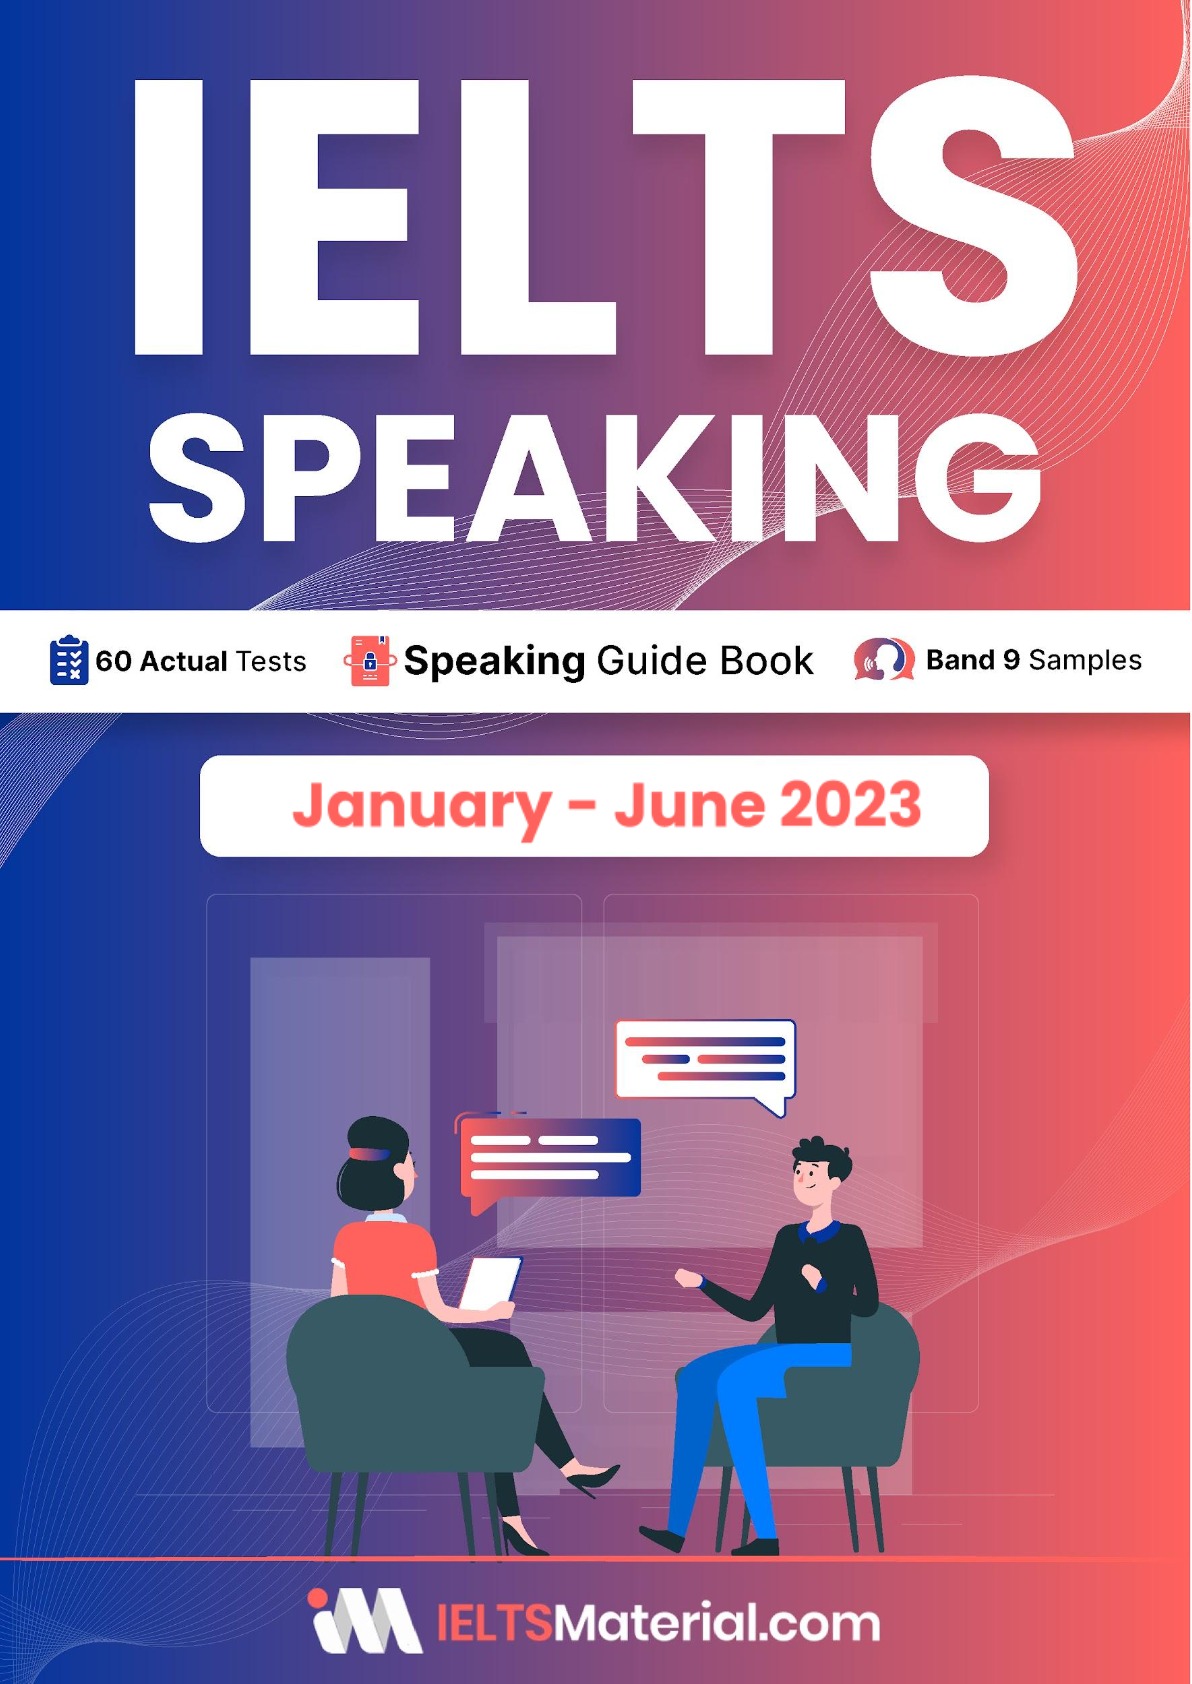 IELTS Speaking: Channeling the voice in 30 days